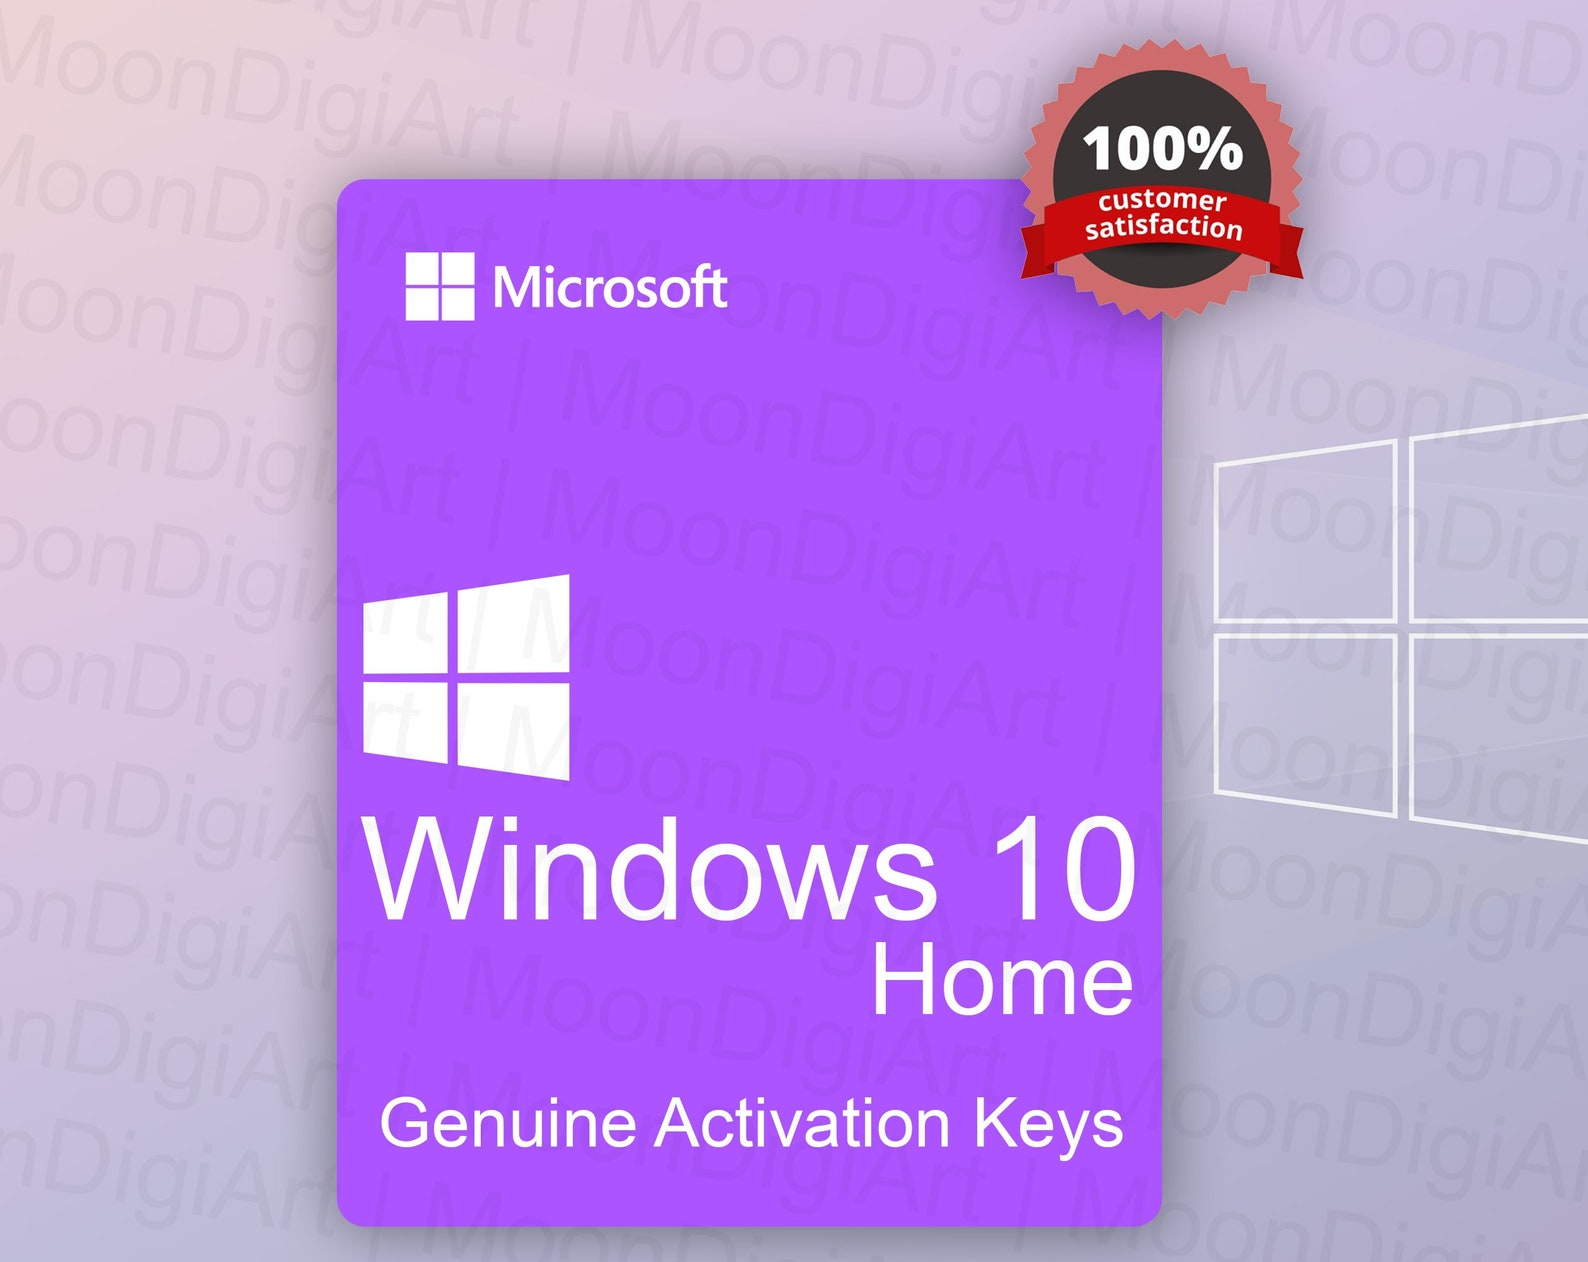 Windows 10 Home License Key (32-64 Bit) | Windows 10 Pro Product Activation License Serial Key, Global Activation
